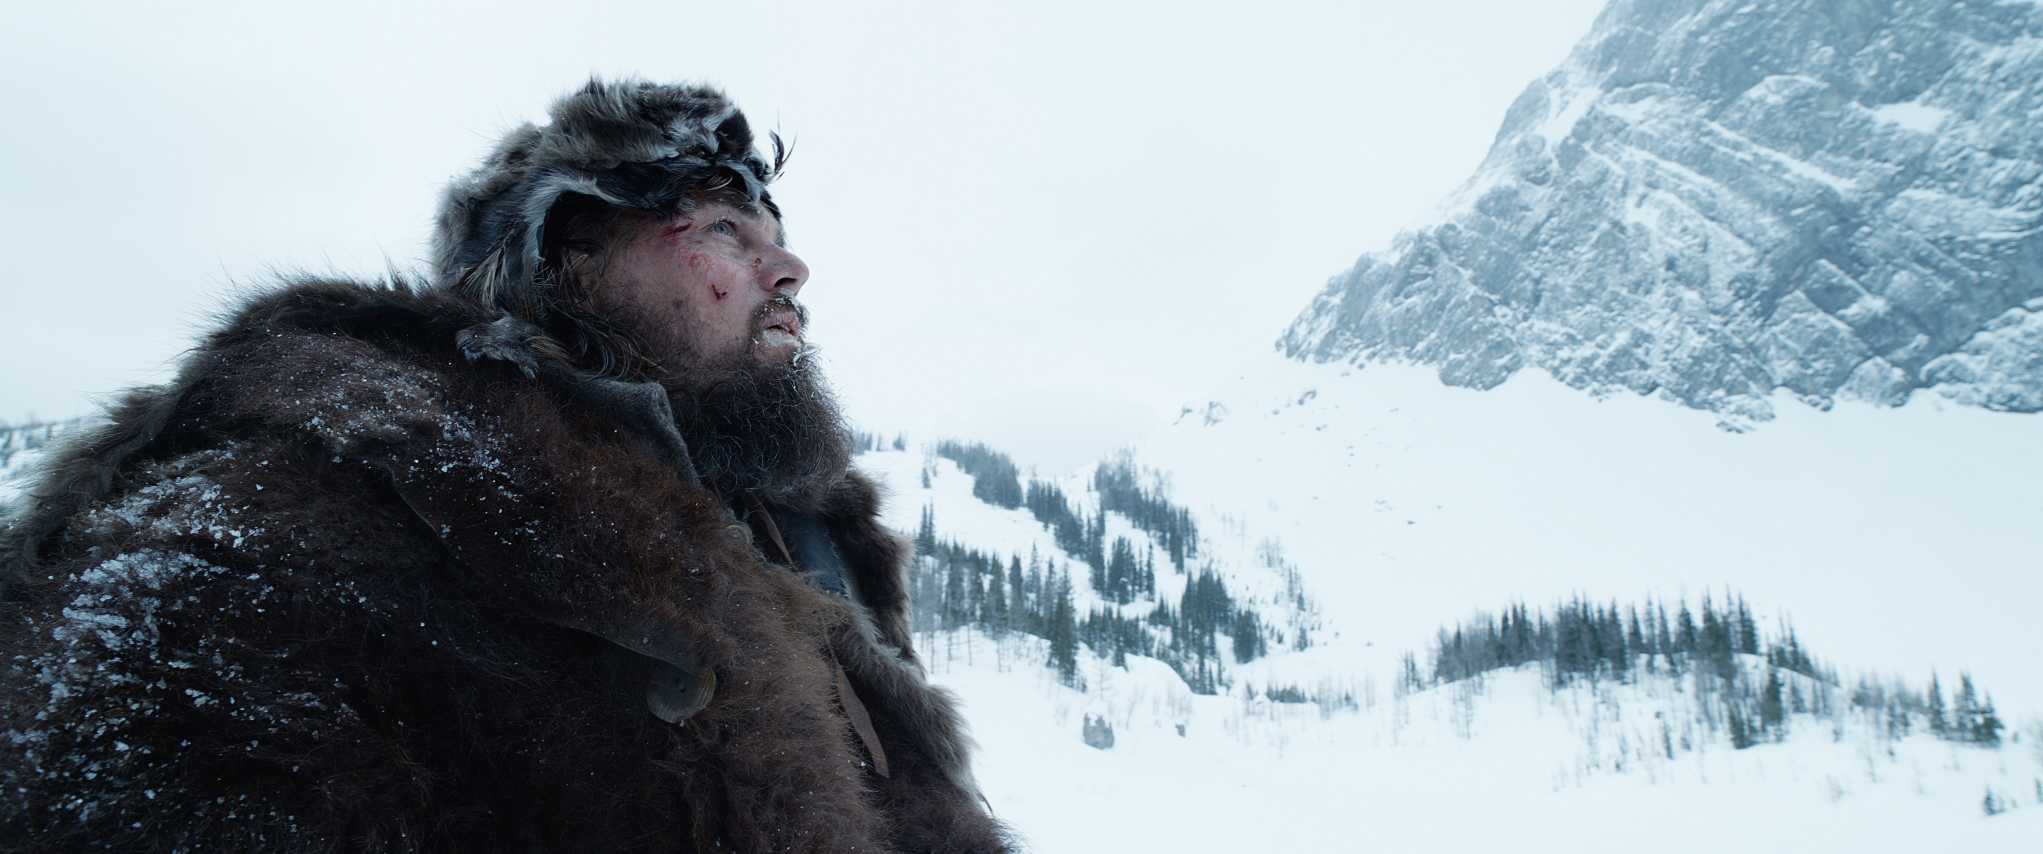 video review : The Revenant